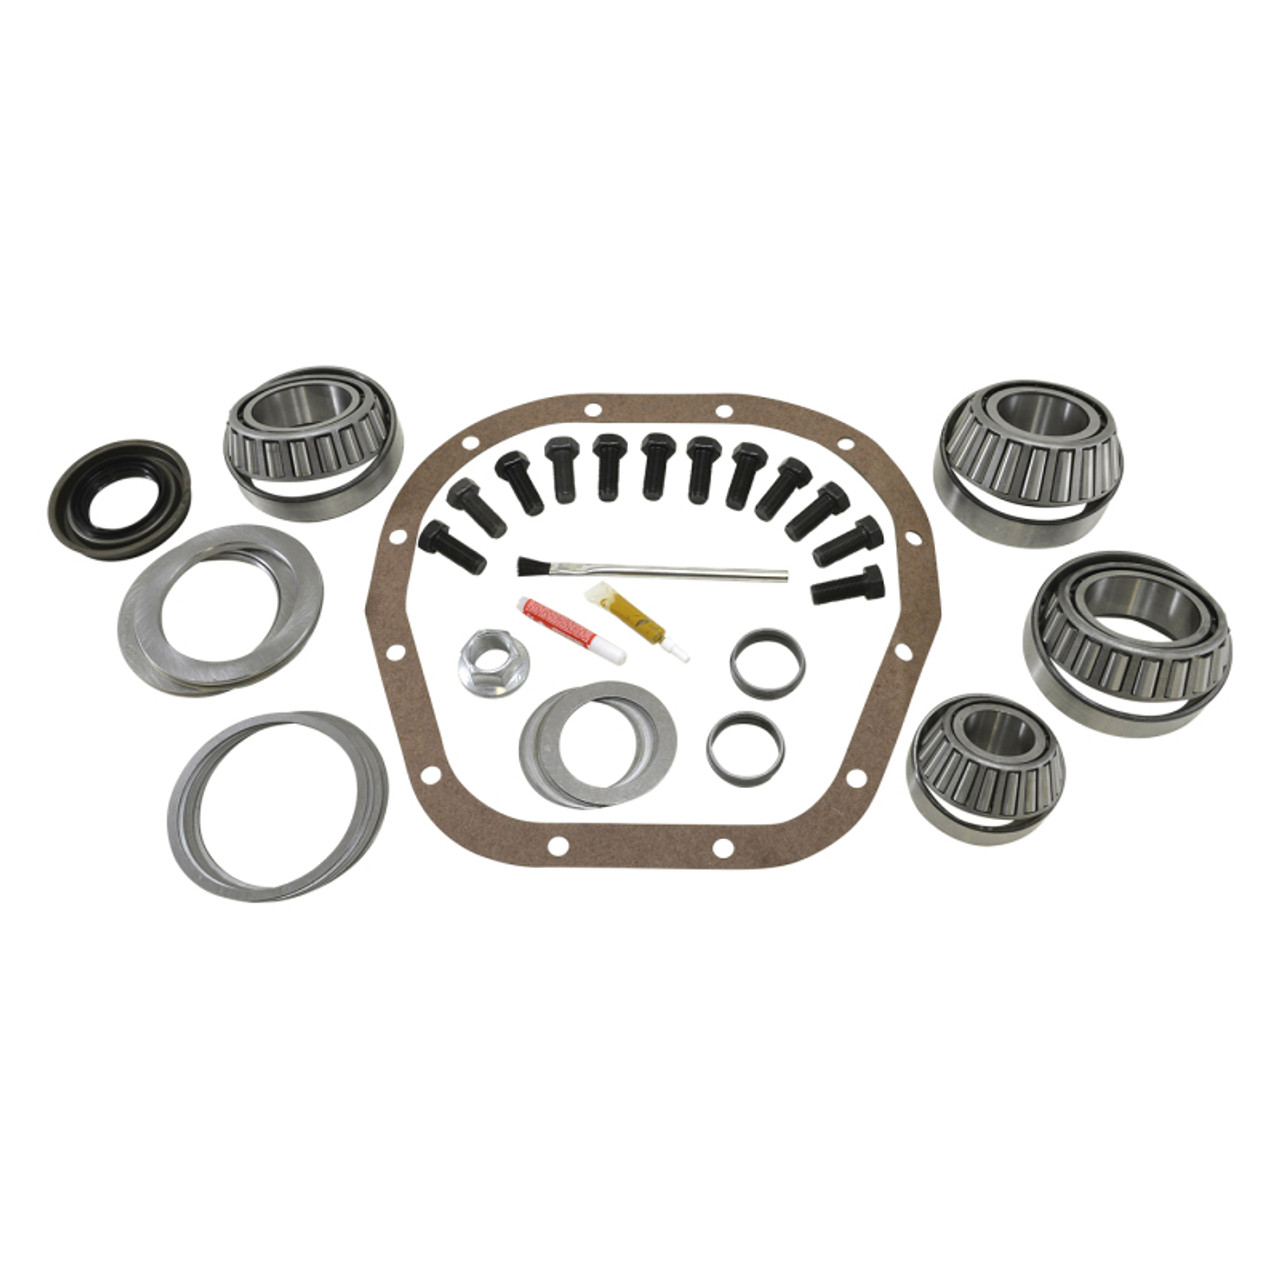 Yukon Gear Master Overhaul Kit For Ford 10.25in Diff - YK F10.25